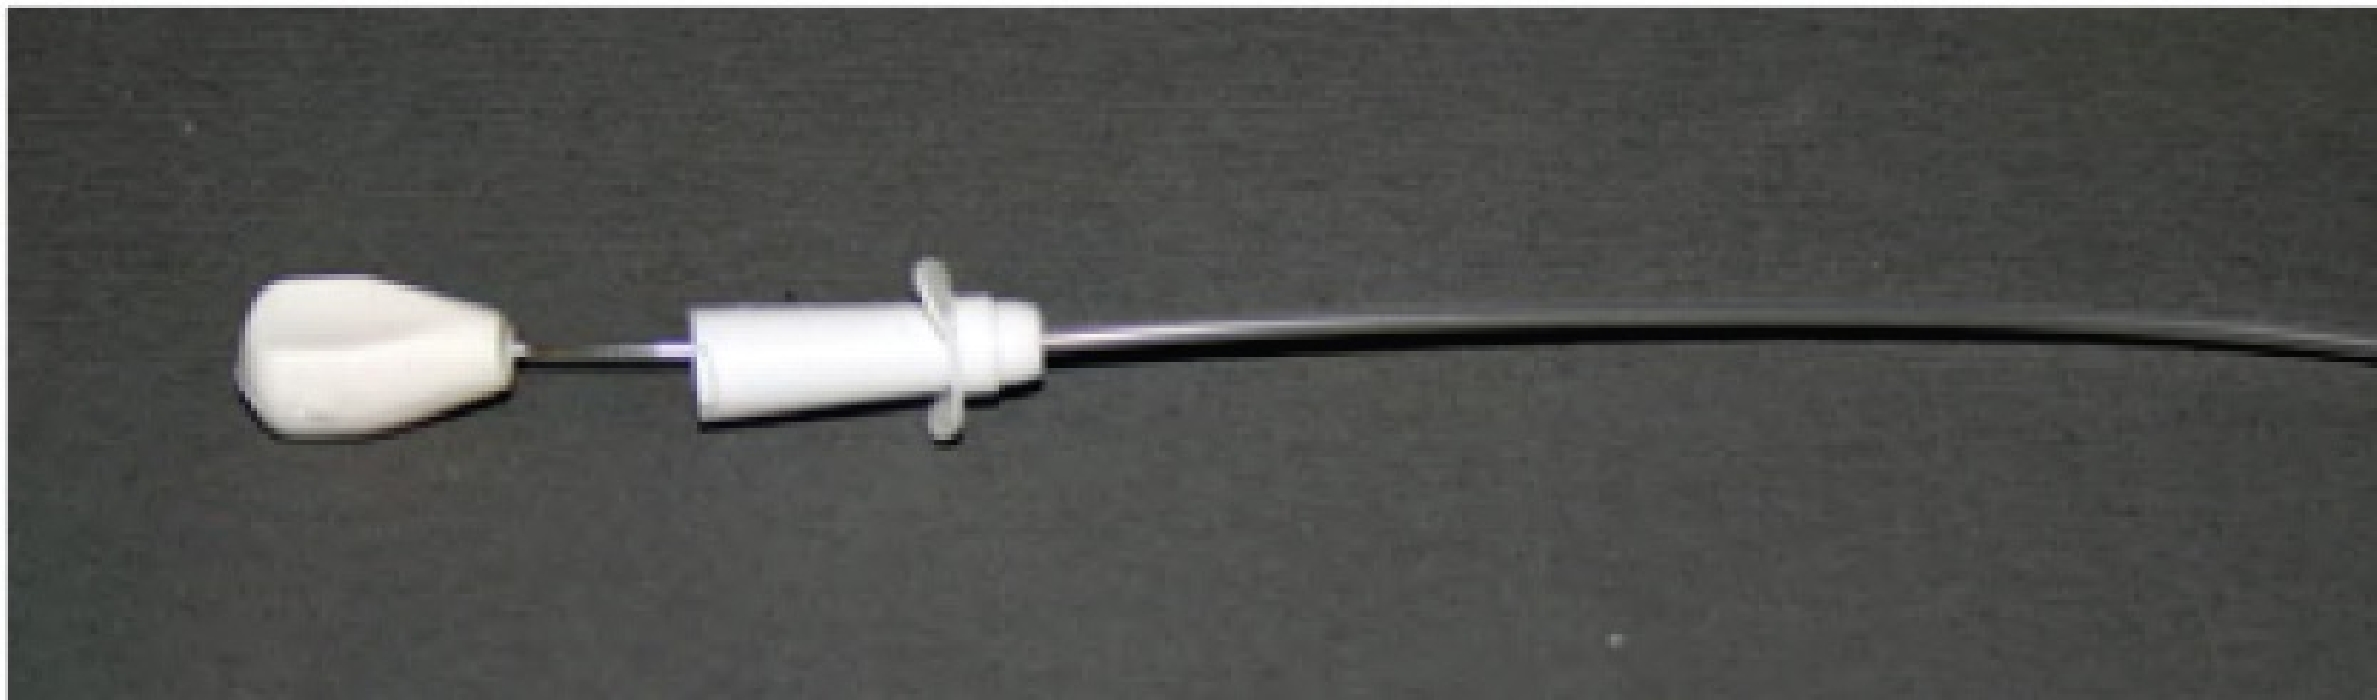 CAT CATHETERS WITH STYLET